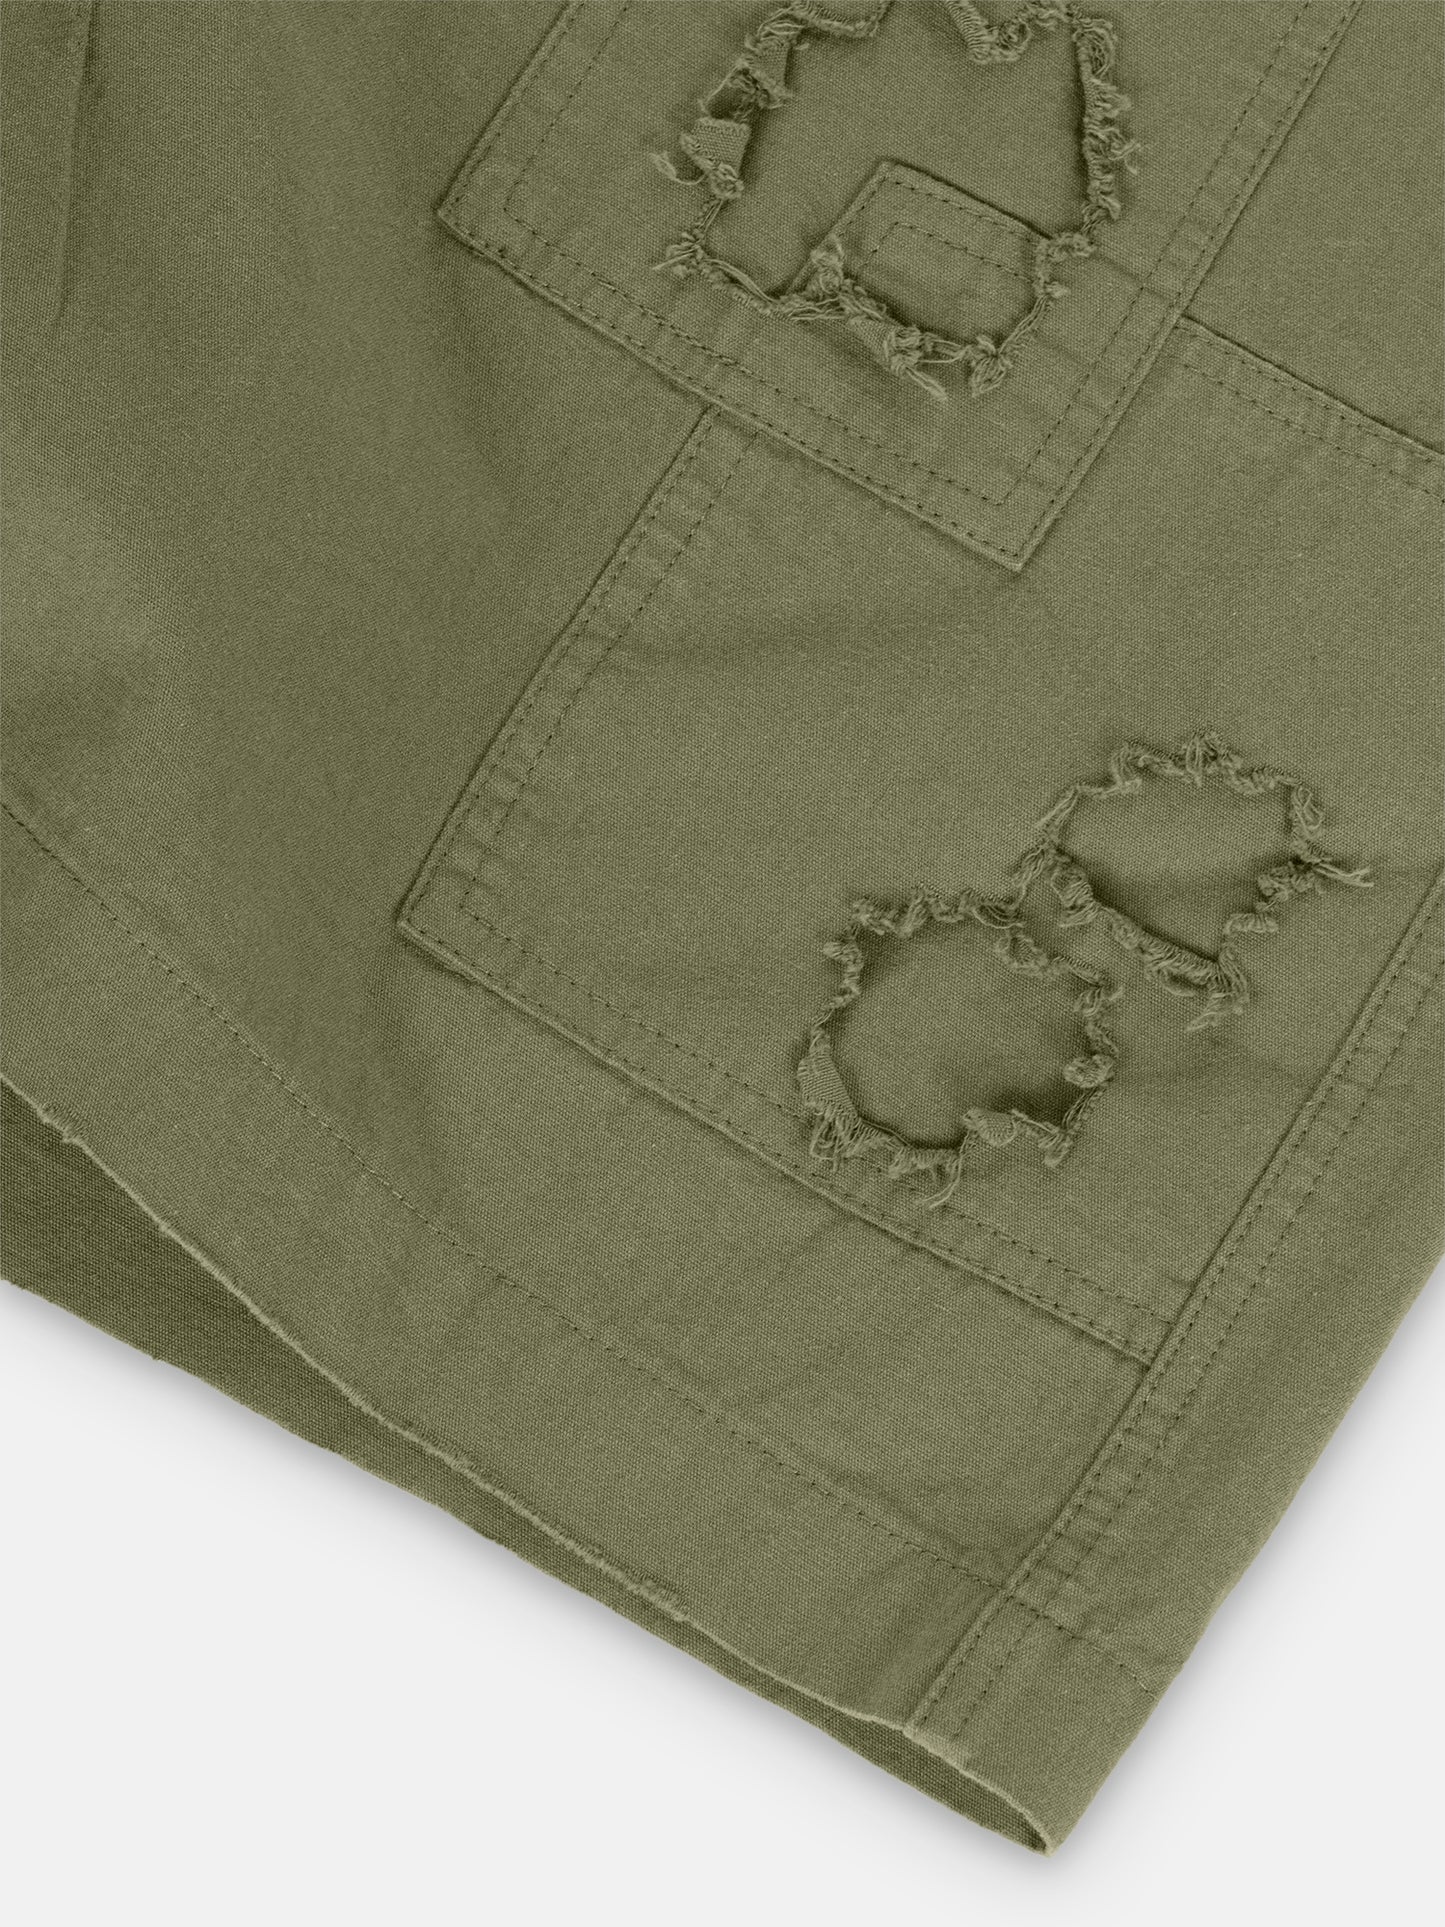 OLIVE GREEN DISTRESSED CARGO SHORTS